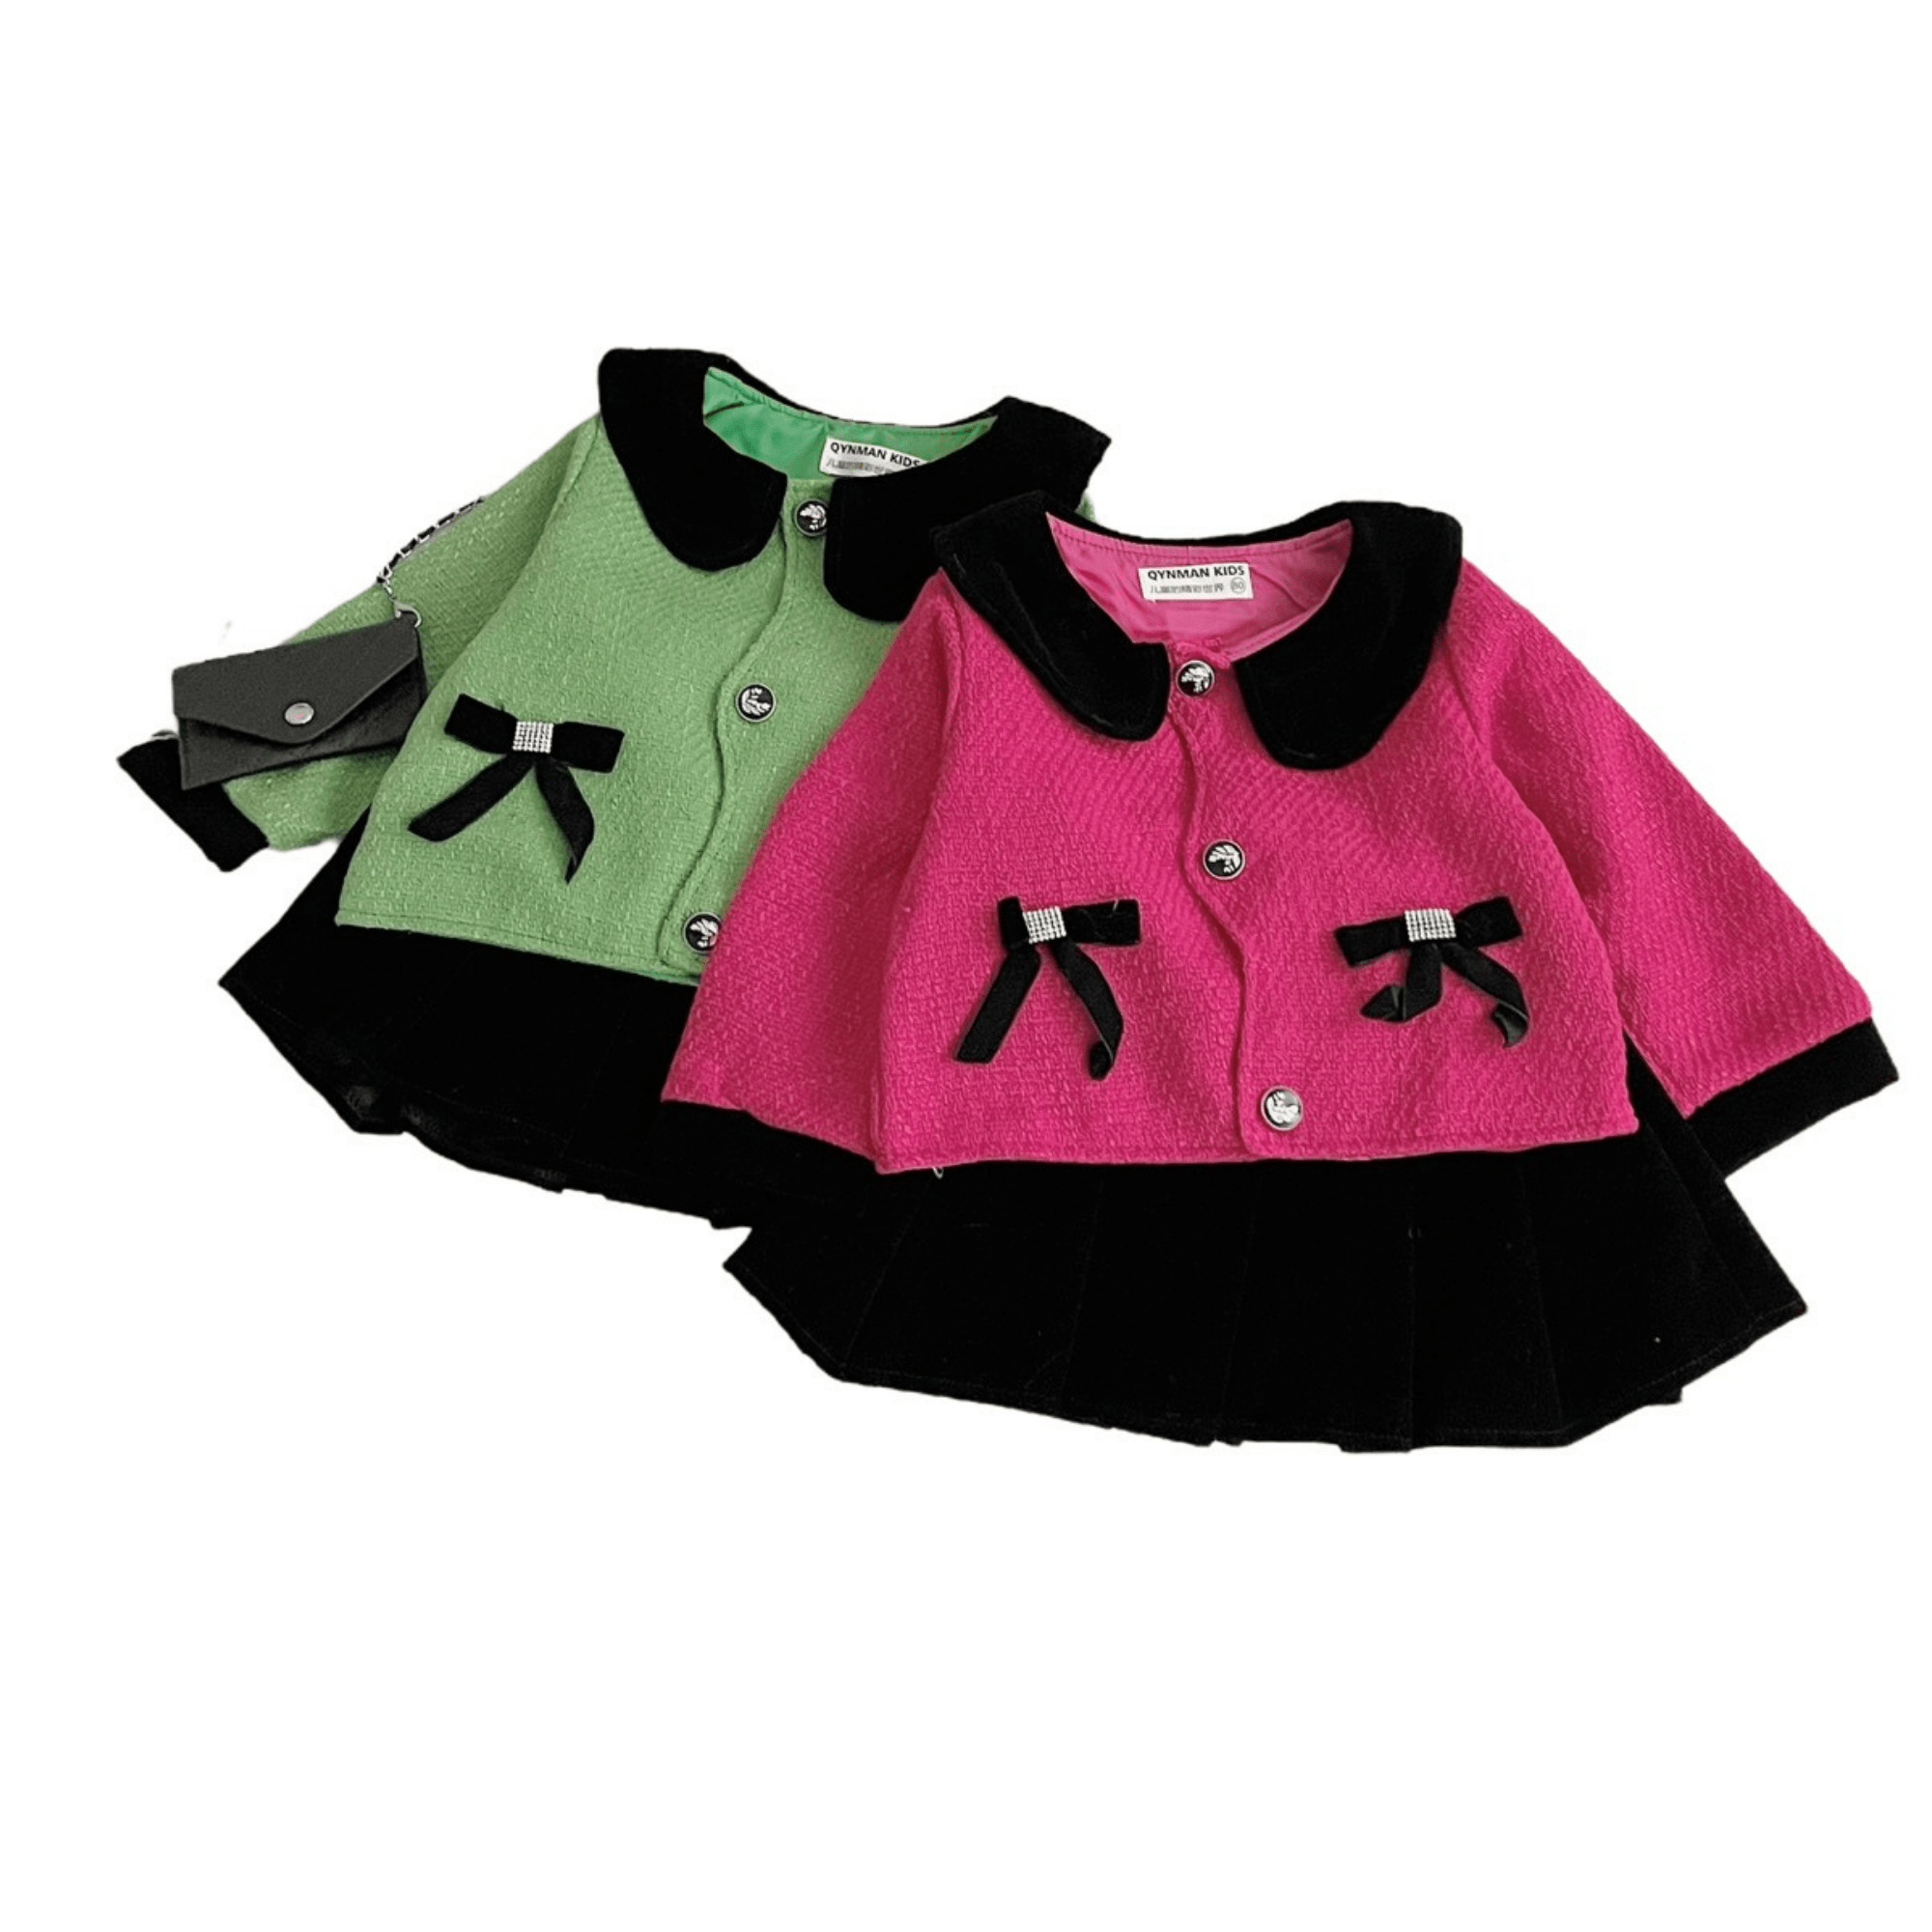 Clothes For Kids Girls Comfortable Natural Dresses Cute Each One In Opp Bag From Vietnam Manufacturer